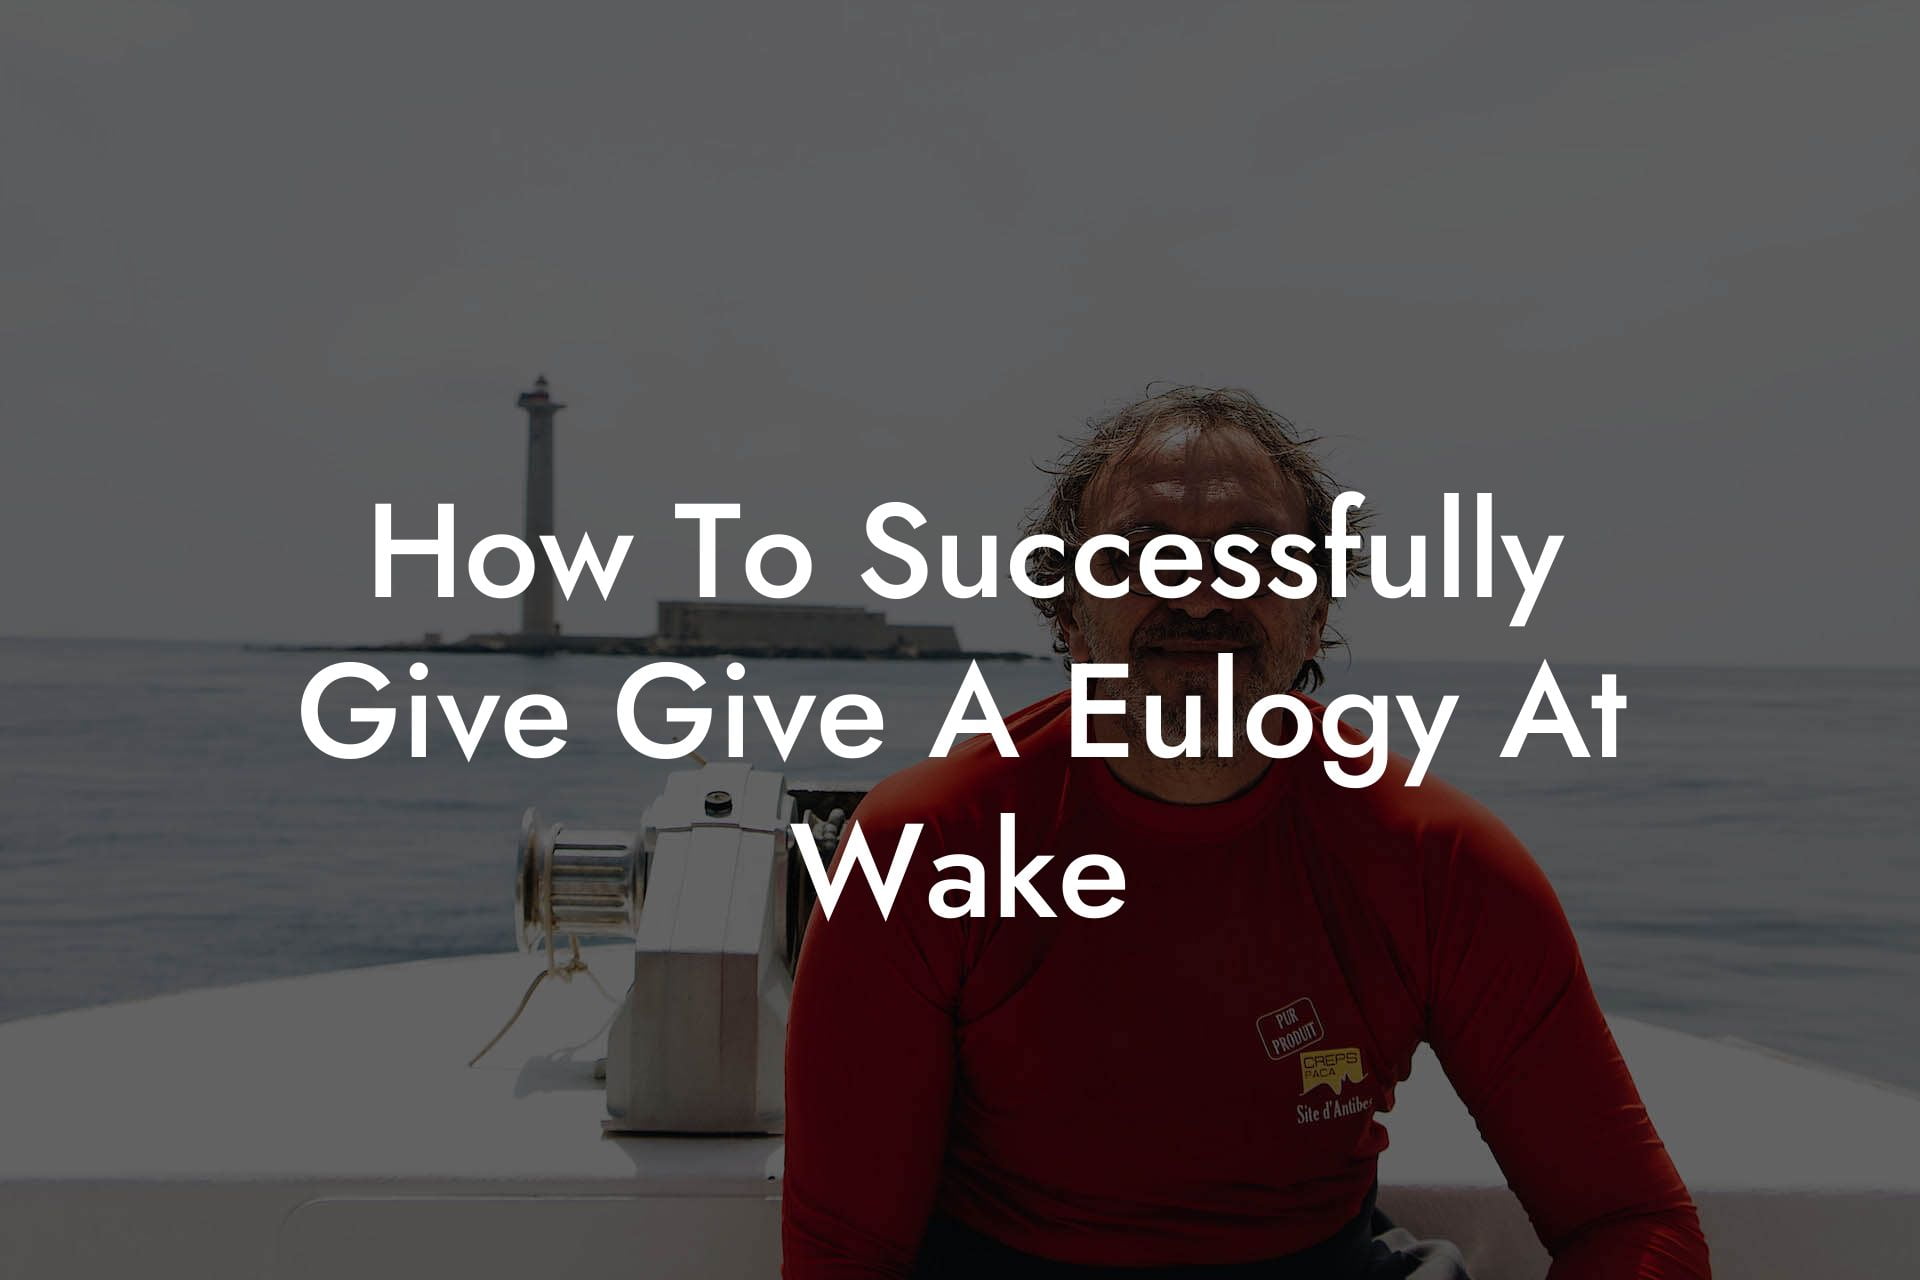 How To Successfully Give Give A Eulogy At Wake